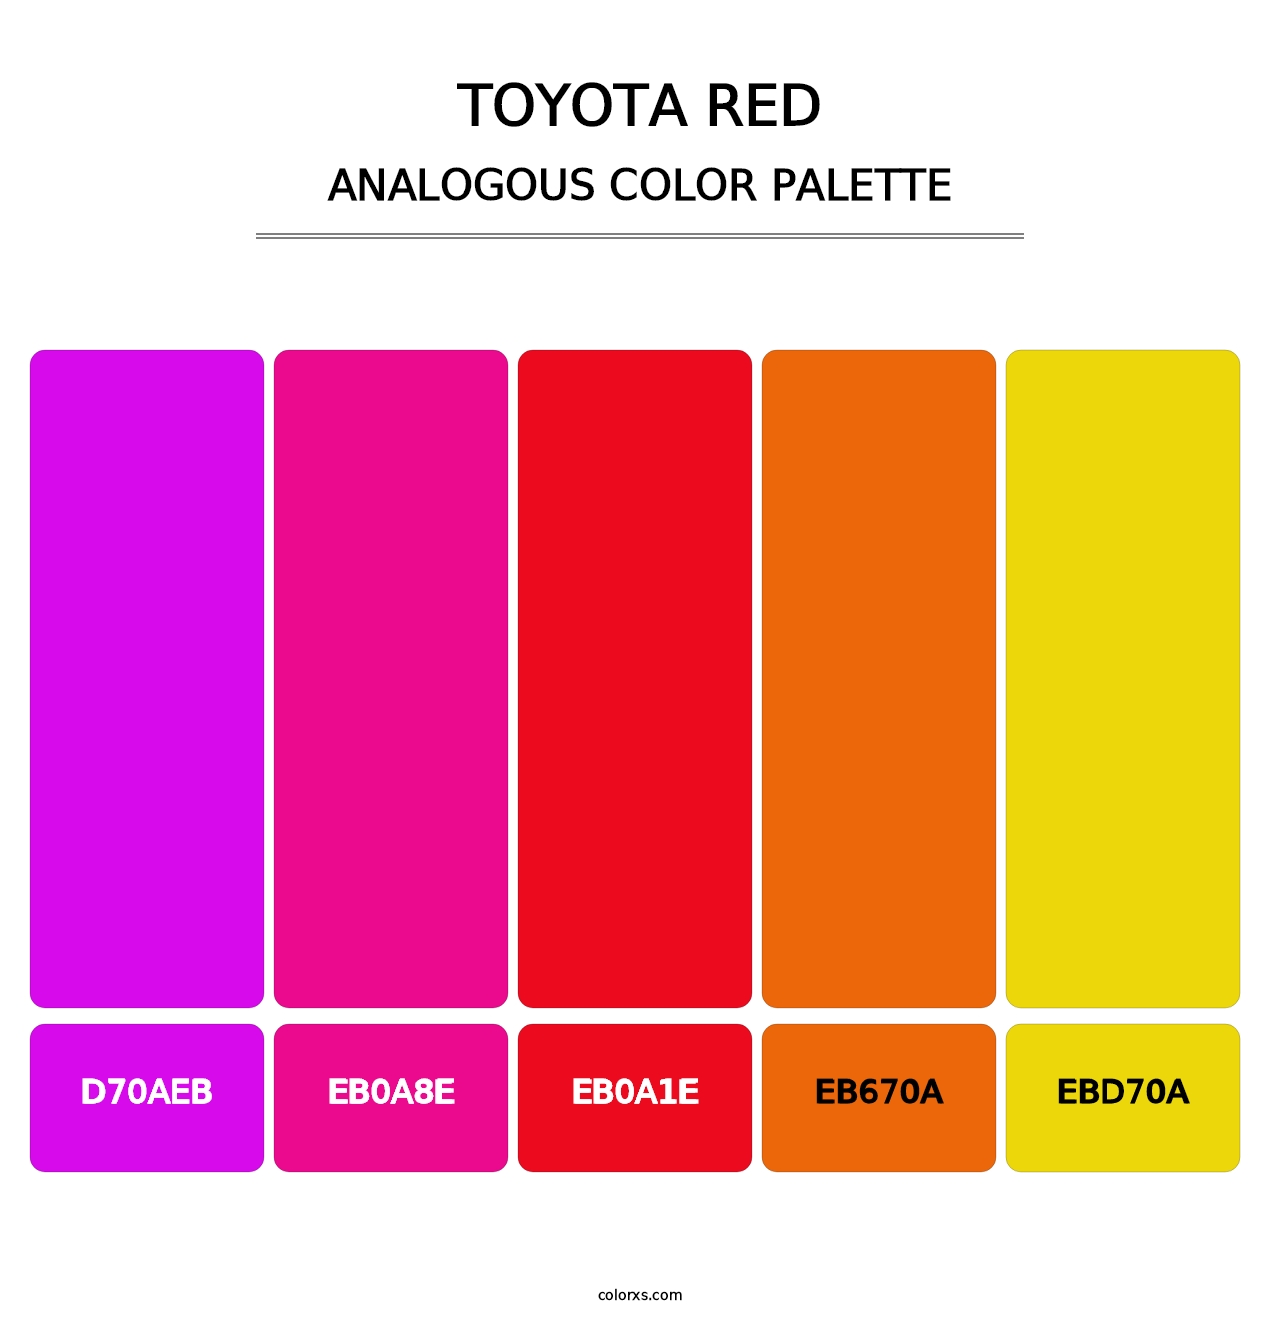 Toyota Red - Analogous Color Palette